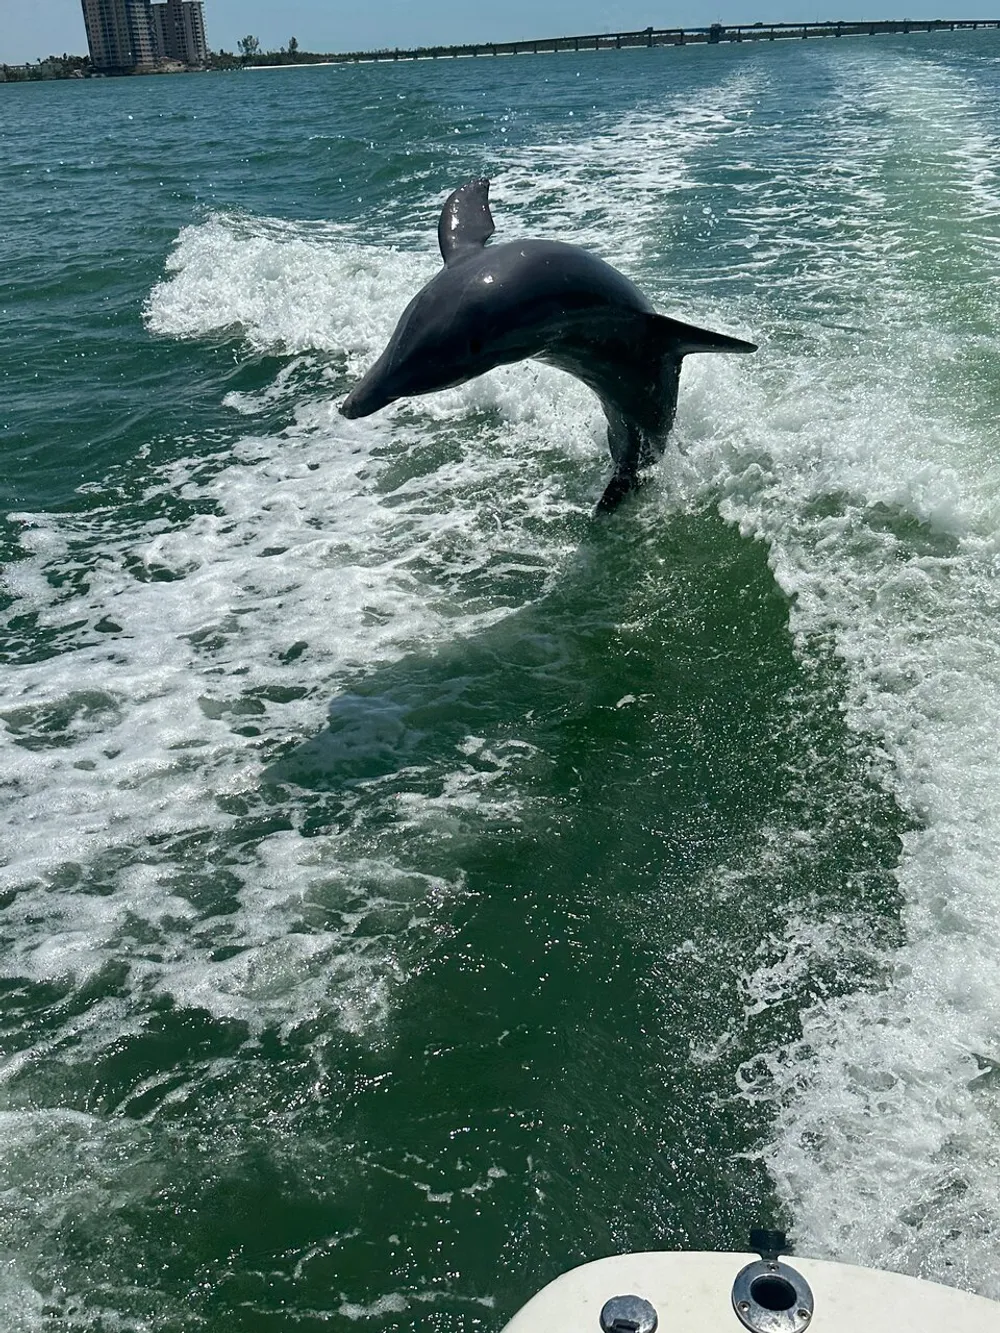 A dolphin is leaping out of the water beside a moving boat with a bridge and shoreline in the background